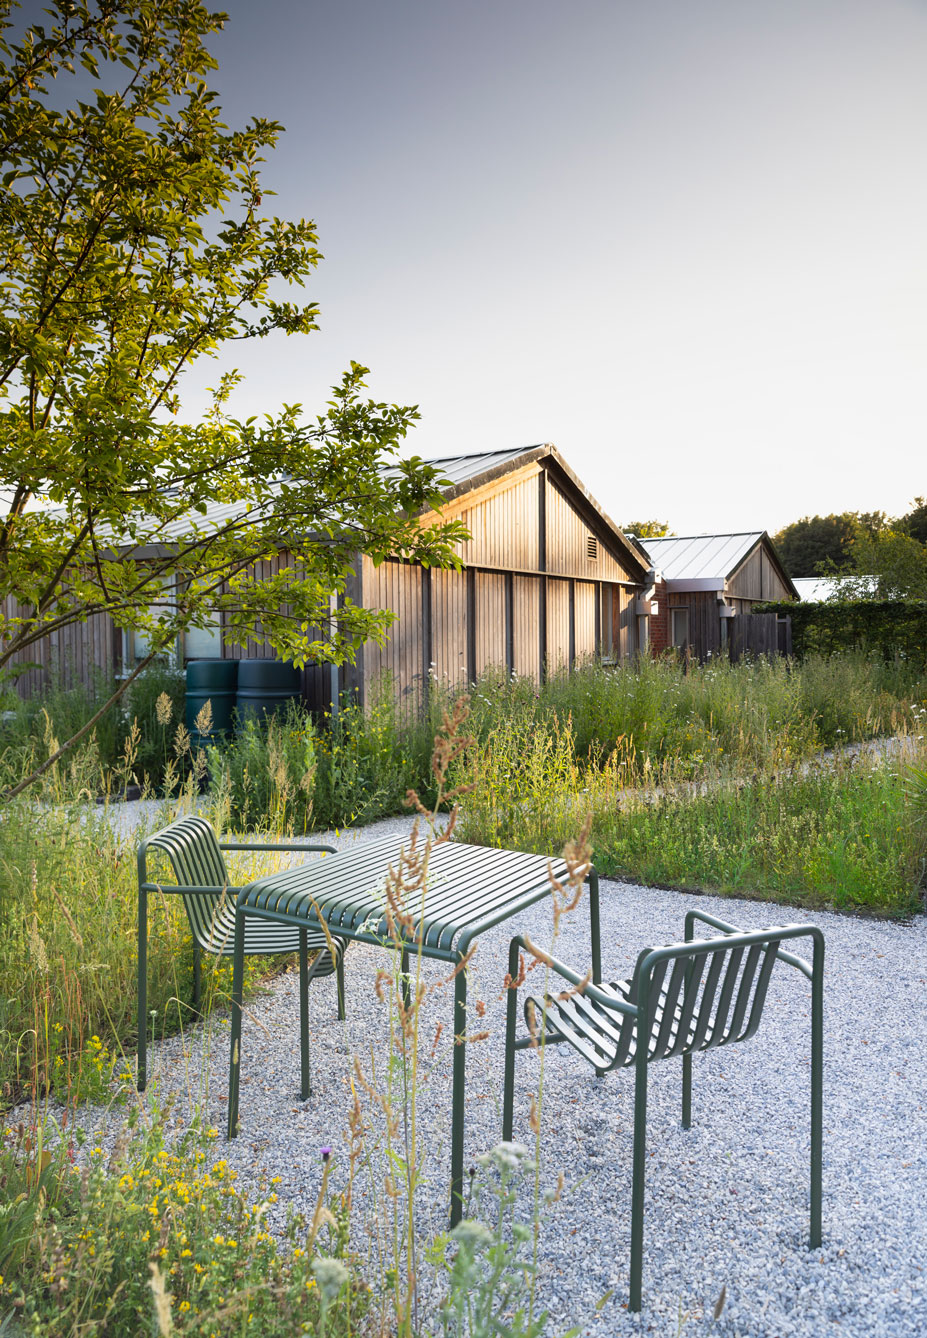 Colm Joseph suffolk walled garden design limestone gravel path seating area wildflower meadow timber architecture